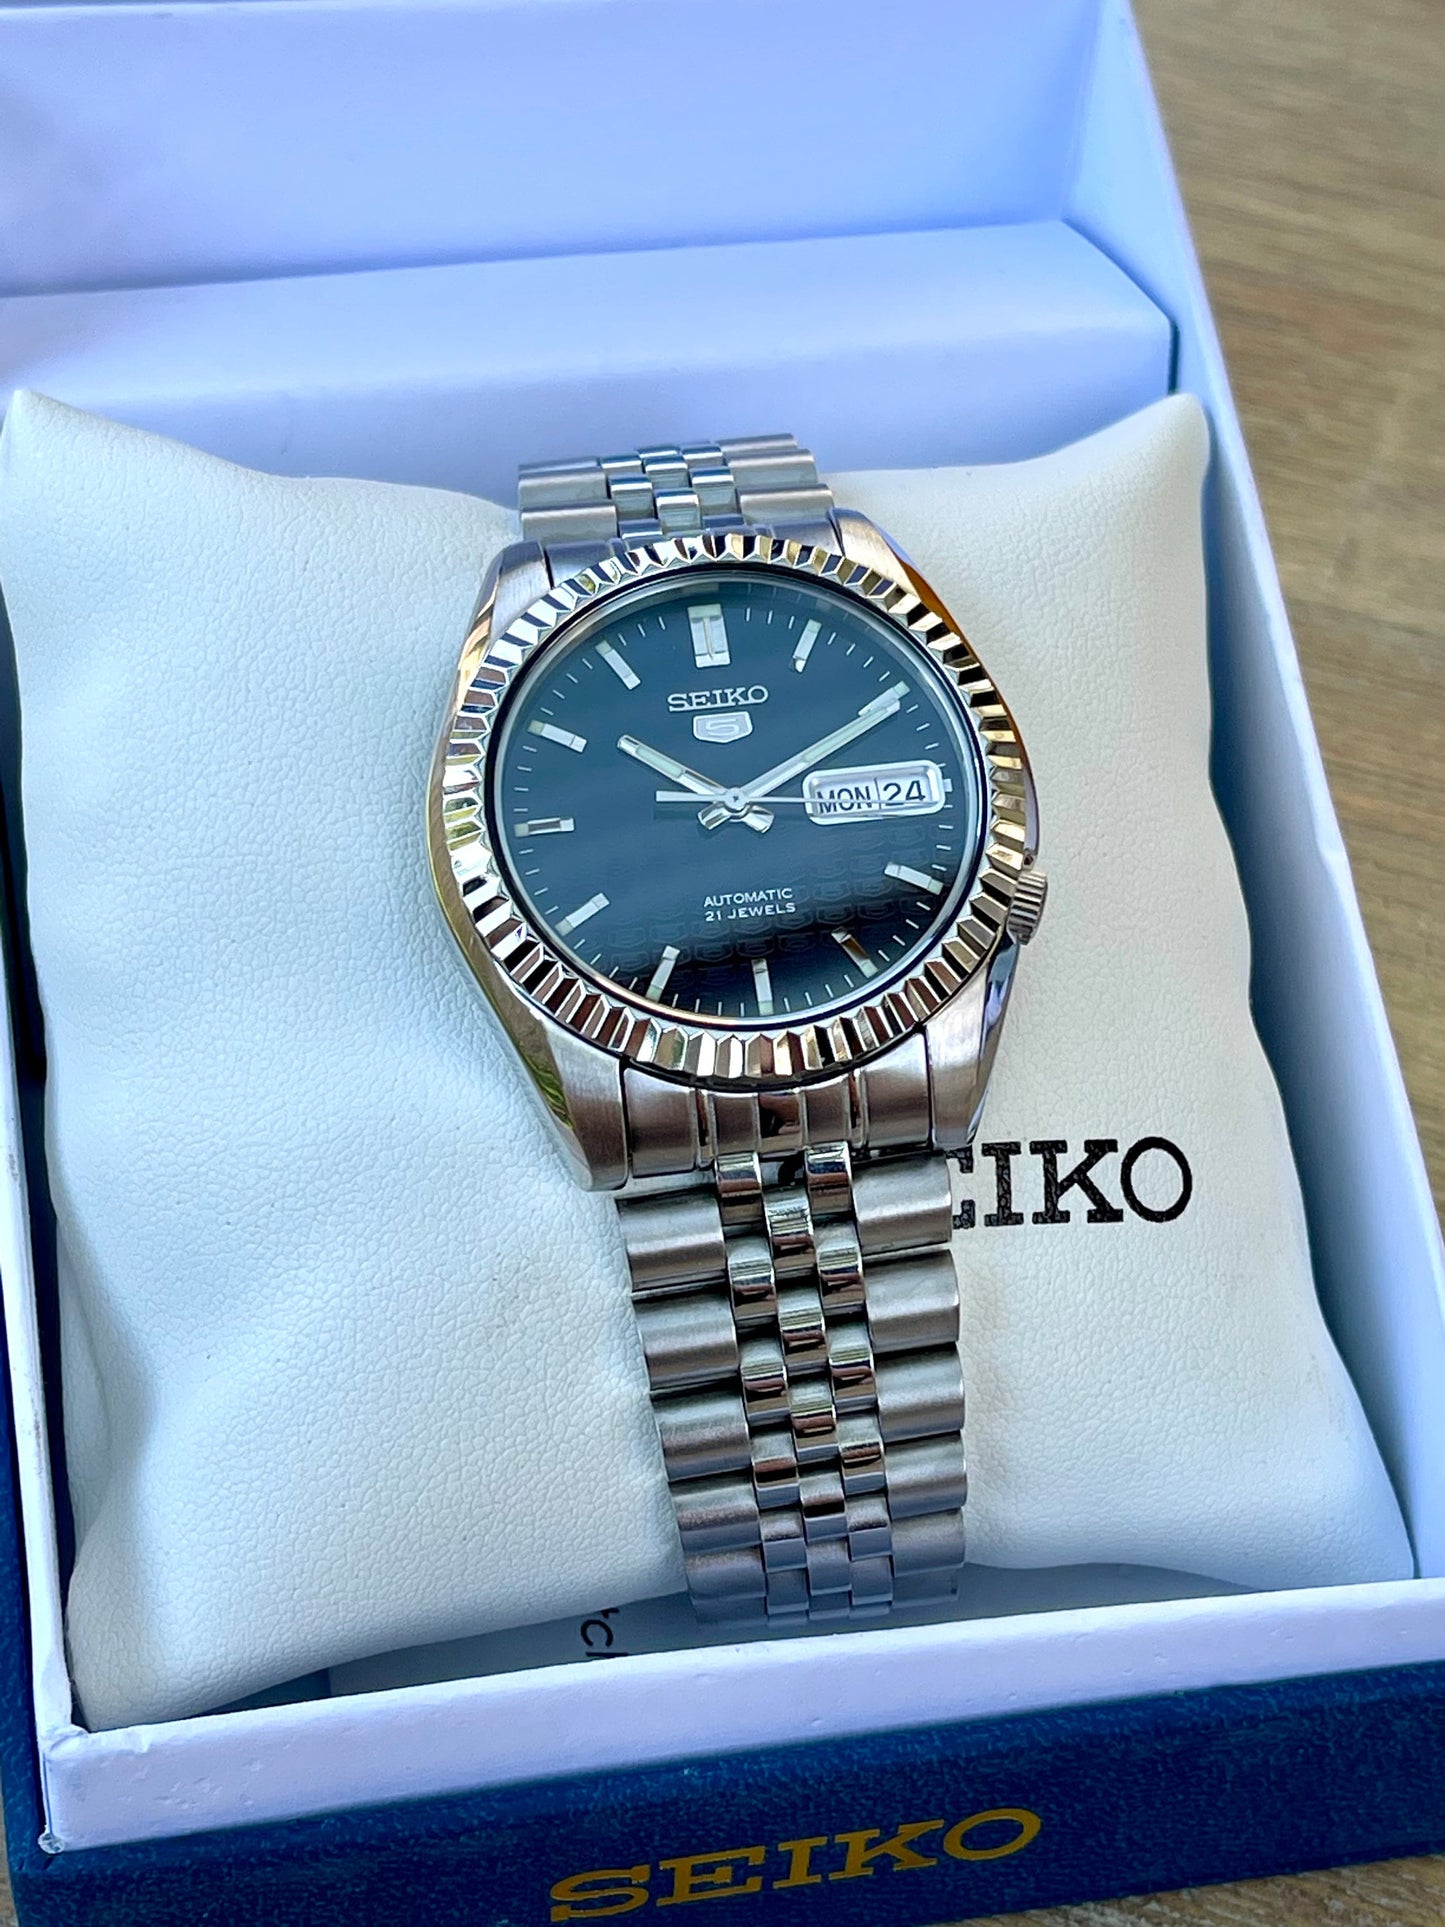 The "SEIKJUST" Genuine Seiko SNK w/ Dark Blue dial Modified - Datejust style with Sapphire crystal, Fluted Bezel, and Jubilee Style Bracelet